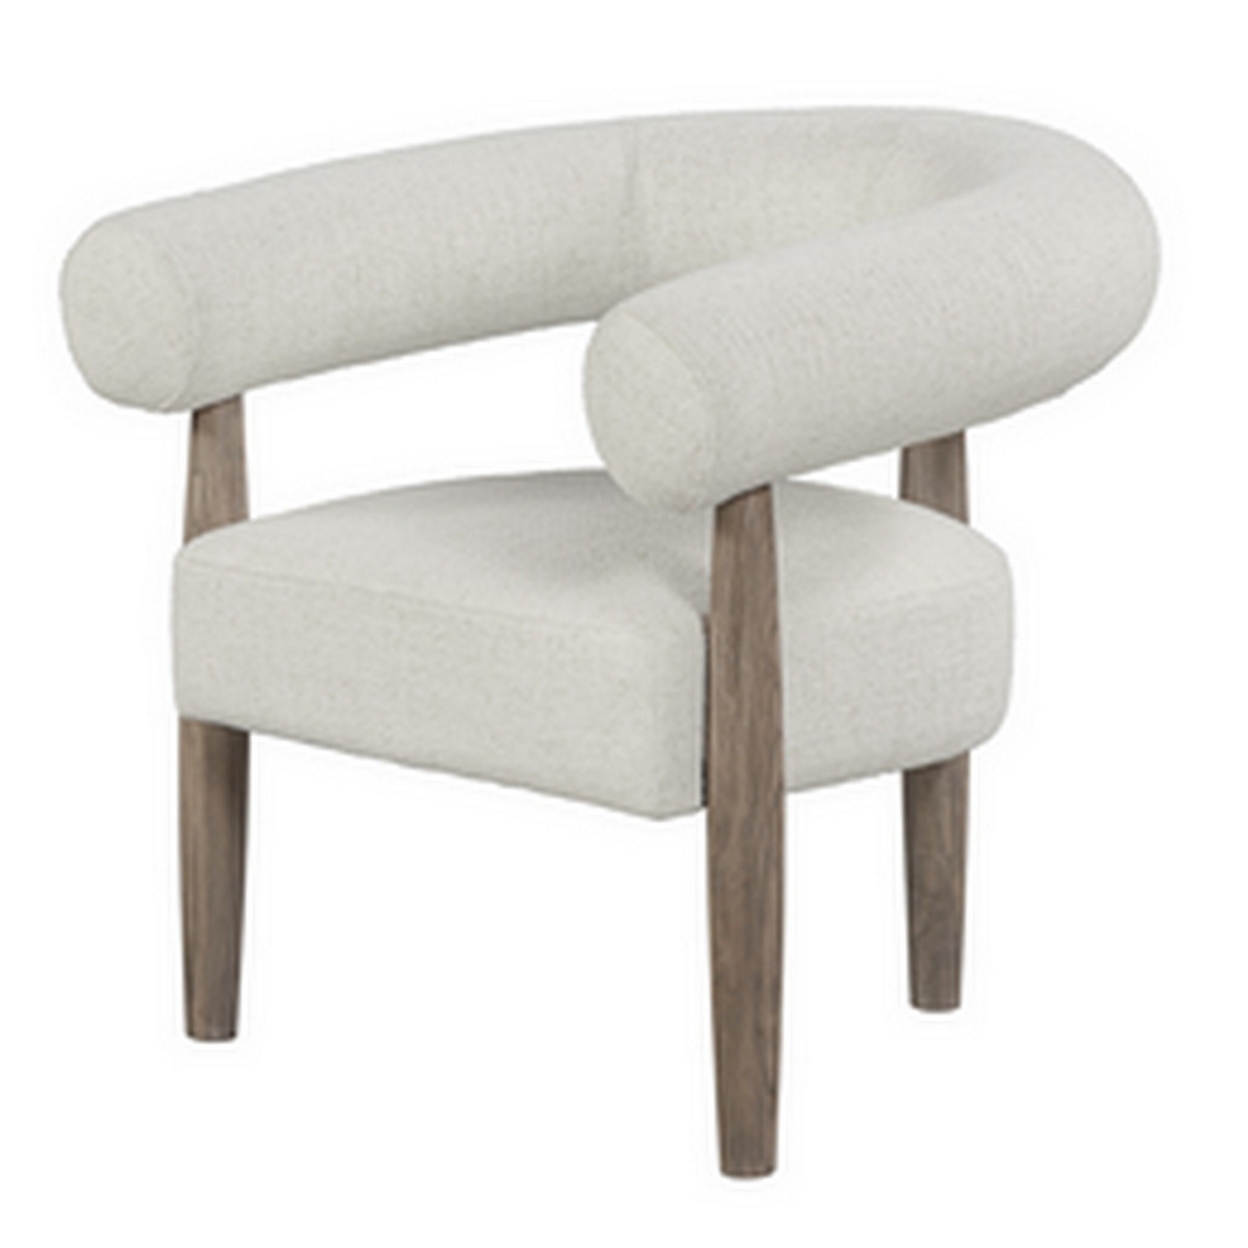 Zob 33 Inch Armchair, Wishbone Curved Cushioned Frame, Off White, Taupe- Saltoro Sherpi